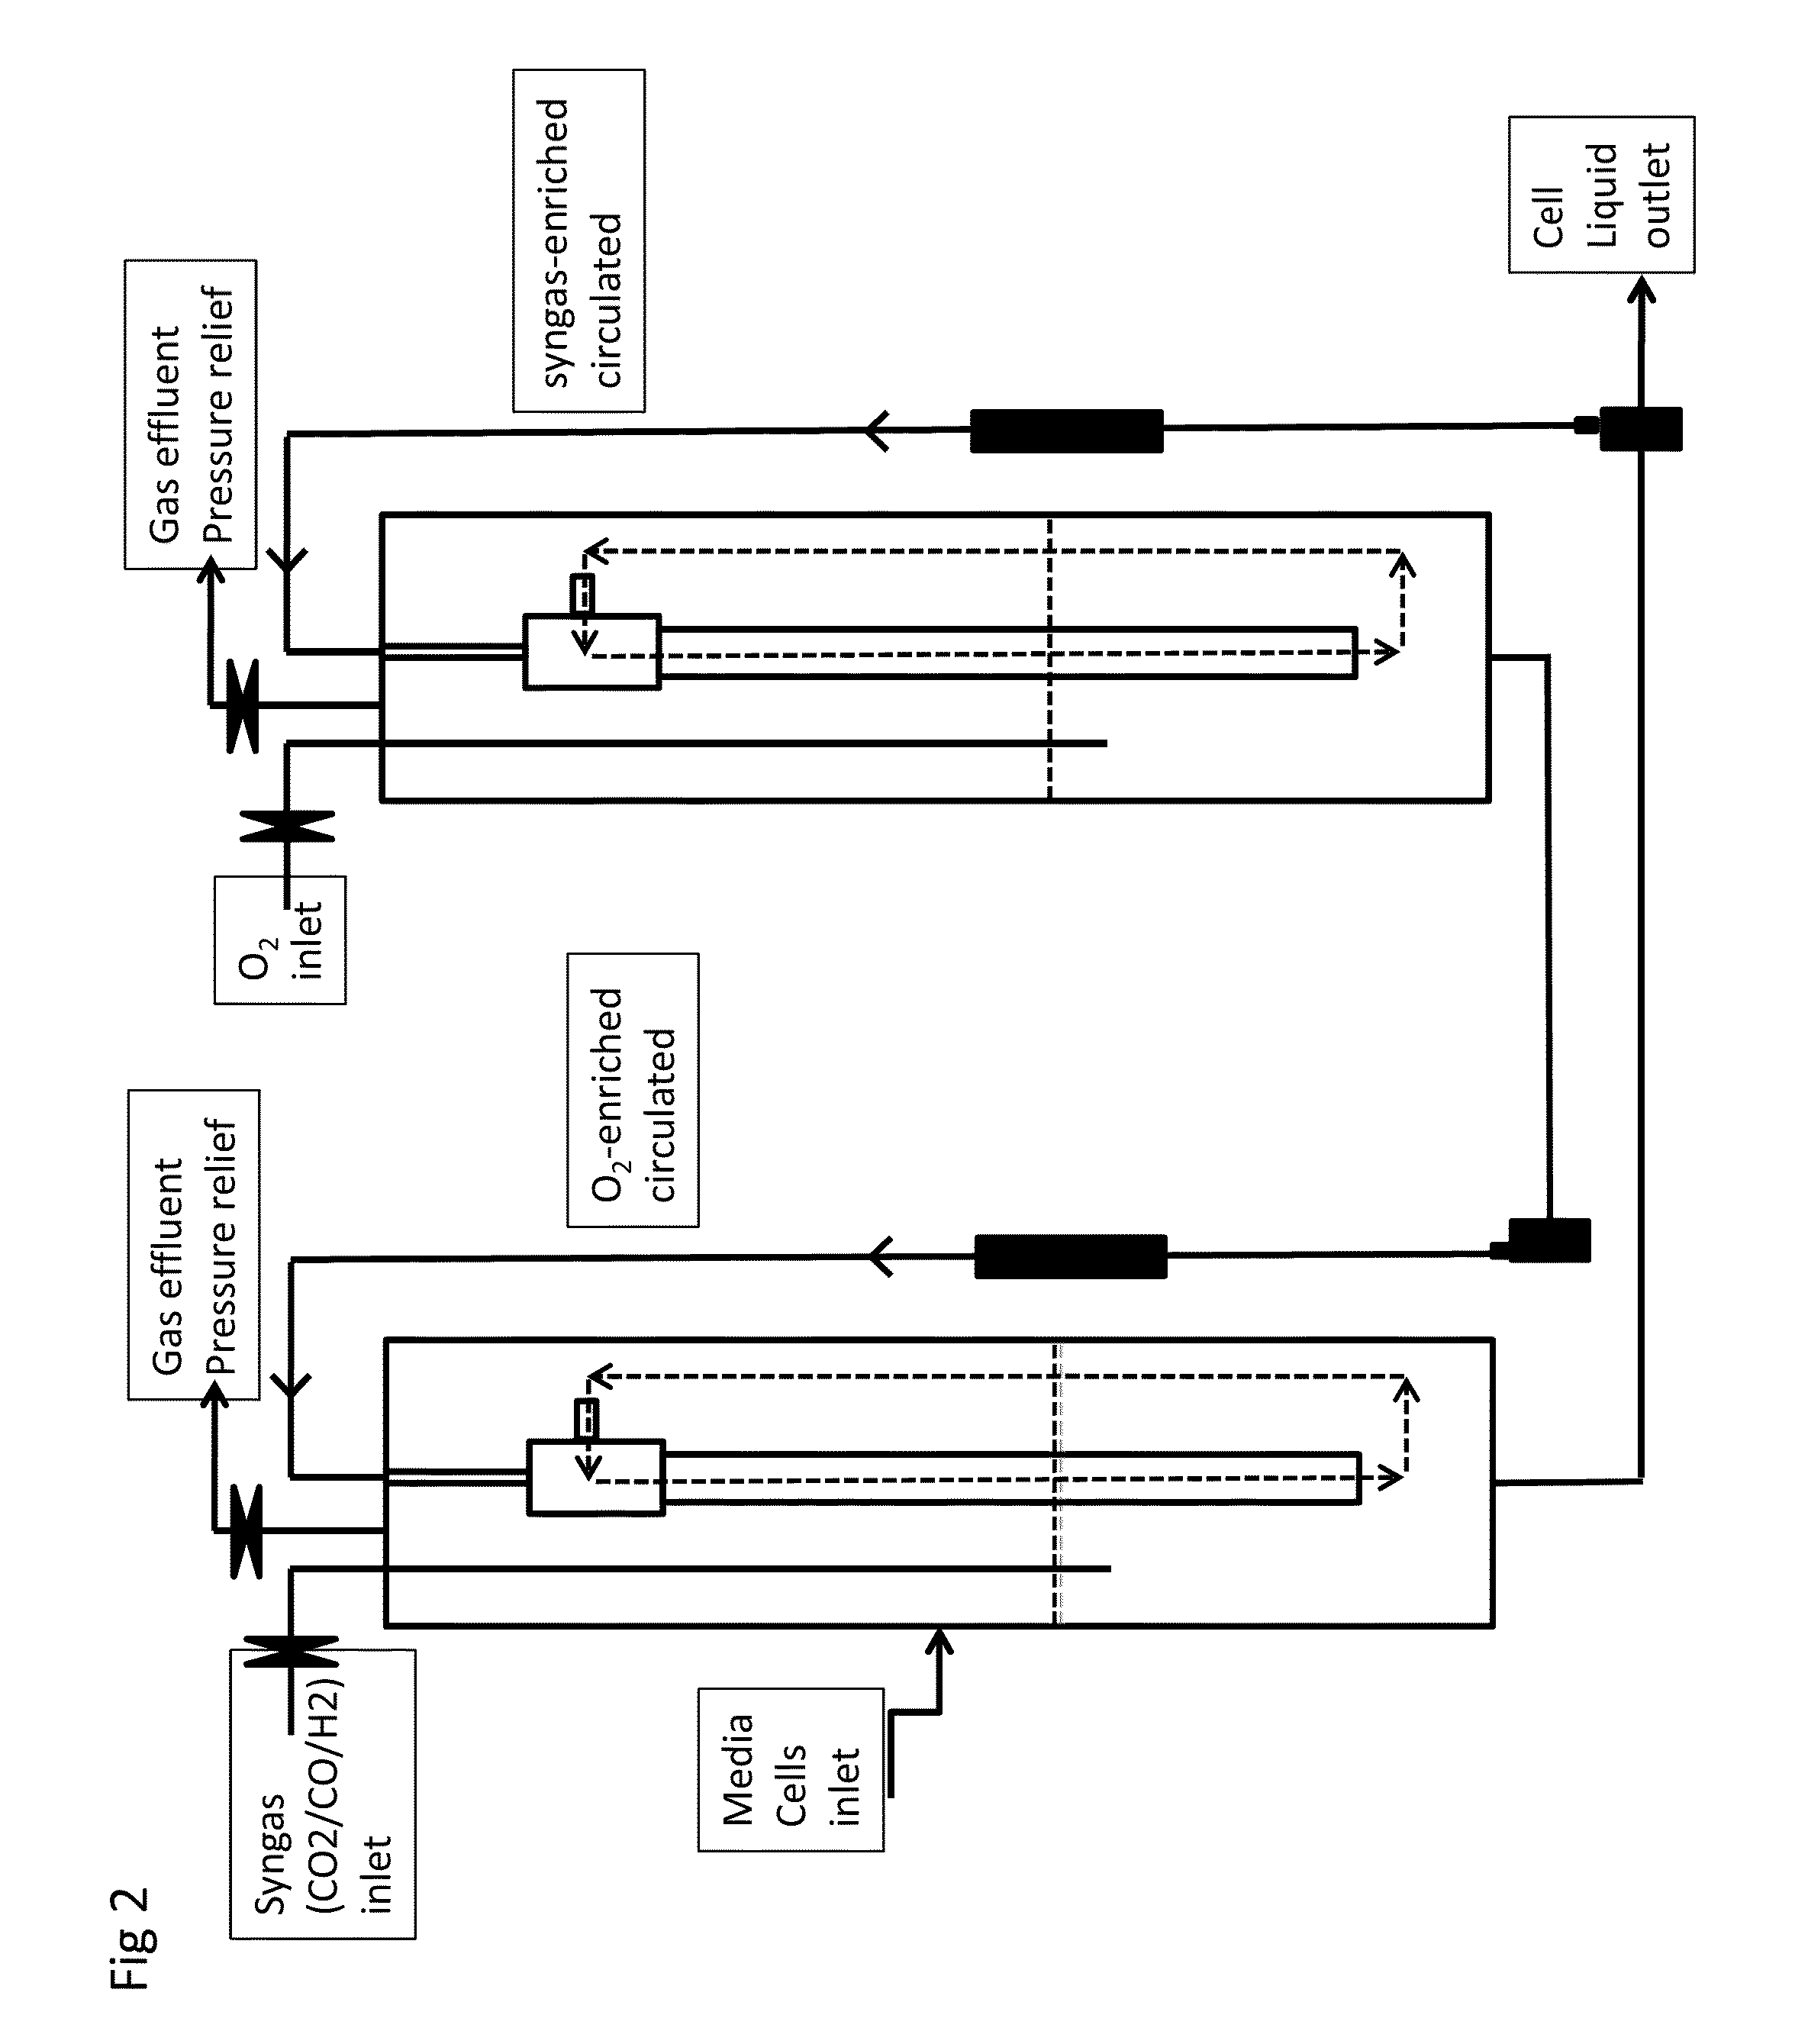 Method and apparatus for growing microbial cultures that require gaseous electron donors, electron acceptors, carbon sources, or other nutrients